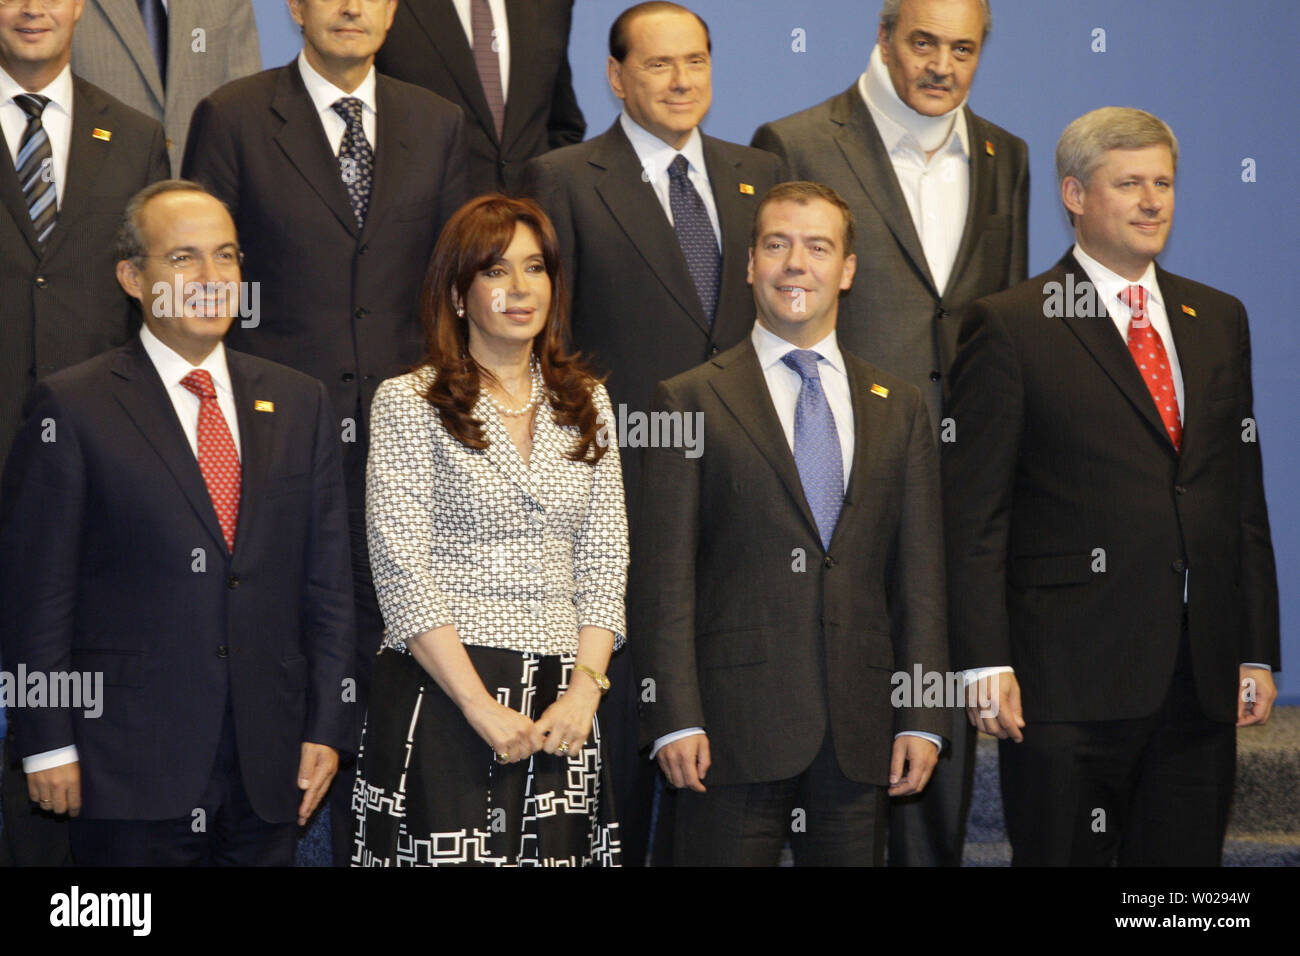 Russian President Dmitry Medvedev (2nd R) smiles between Canadian Prime Minister Stephen Harper (R) and Argentinean President Cristina Fernandez de Kirchner during a group photo on the second day of the G-20 summit in Pittsburgh, Pennsylvania on September 25, 2009. G-20 leaders are working on an accord to prevent a repeat of the worst global financial crisis since the Great Depression and ensure a sustained recovery. UPI/Anatoli Zhdanov Stock Photo